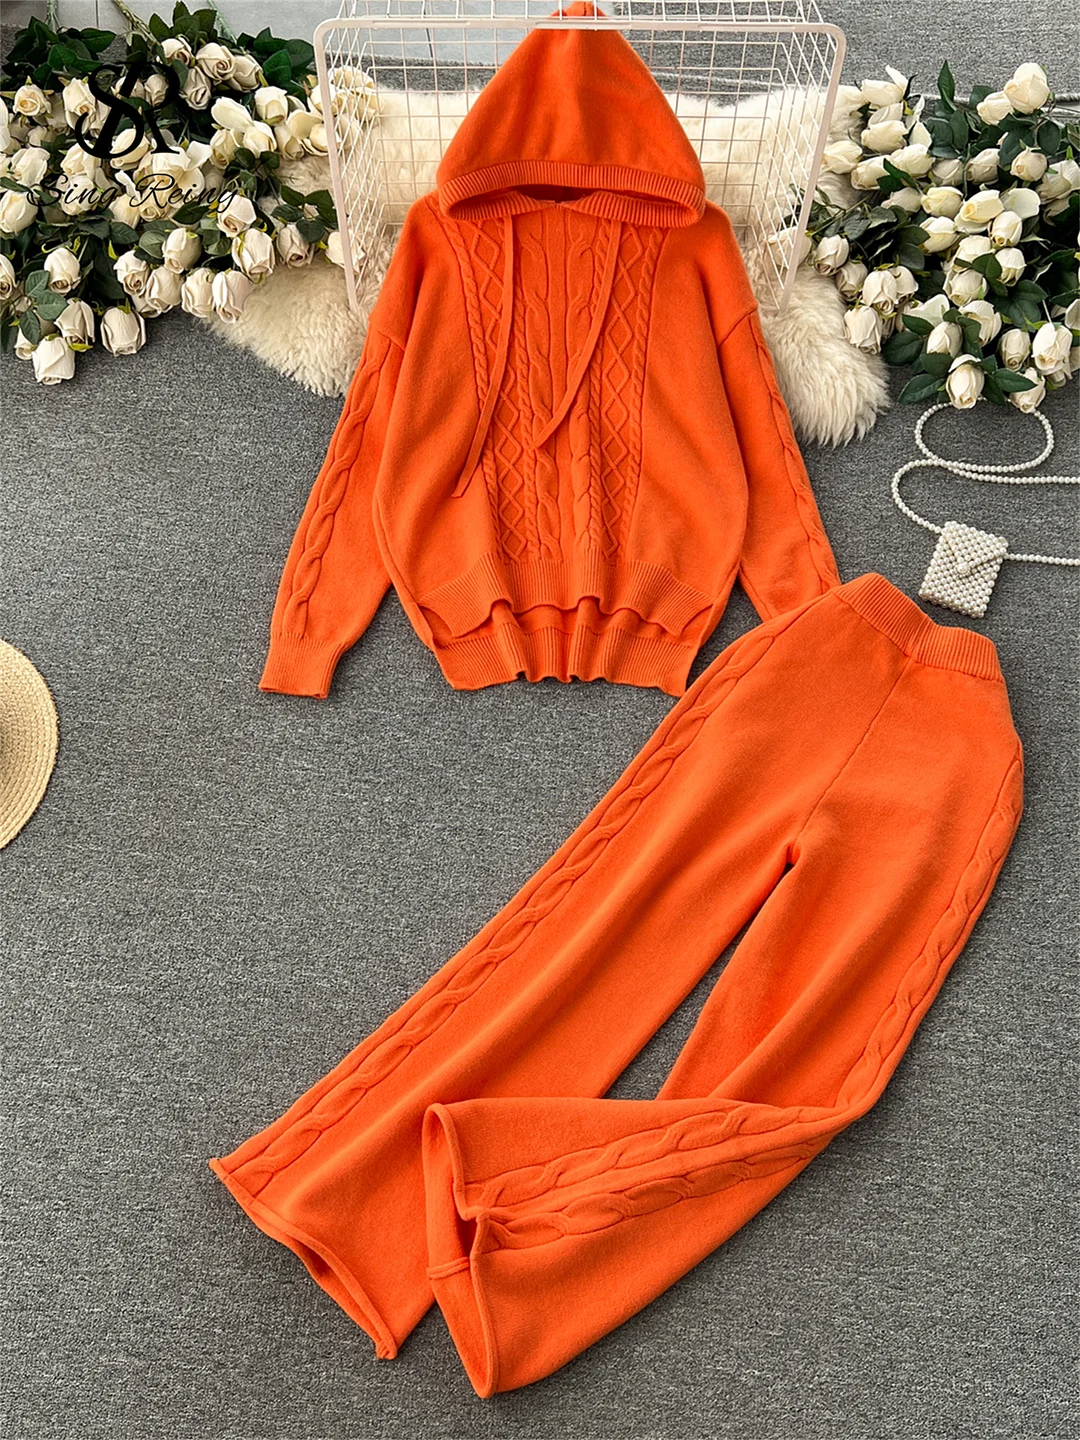 Huibahe Winter Women Warm Knitted Suits Loose Drawstring Hooded Pullover+ Wide Legs Long Pants Fashion Sports Two Piece Sets